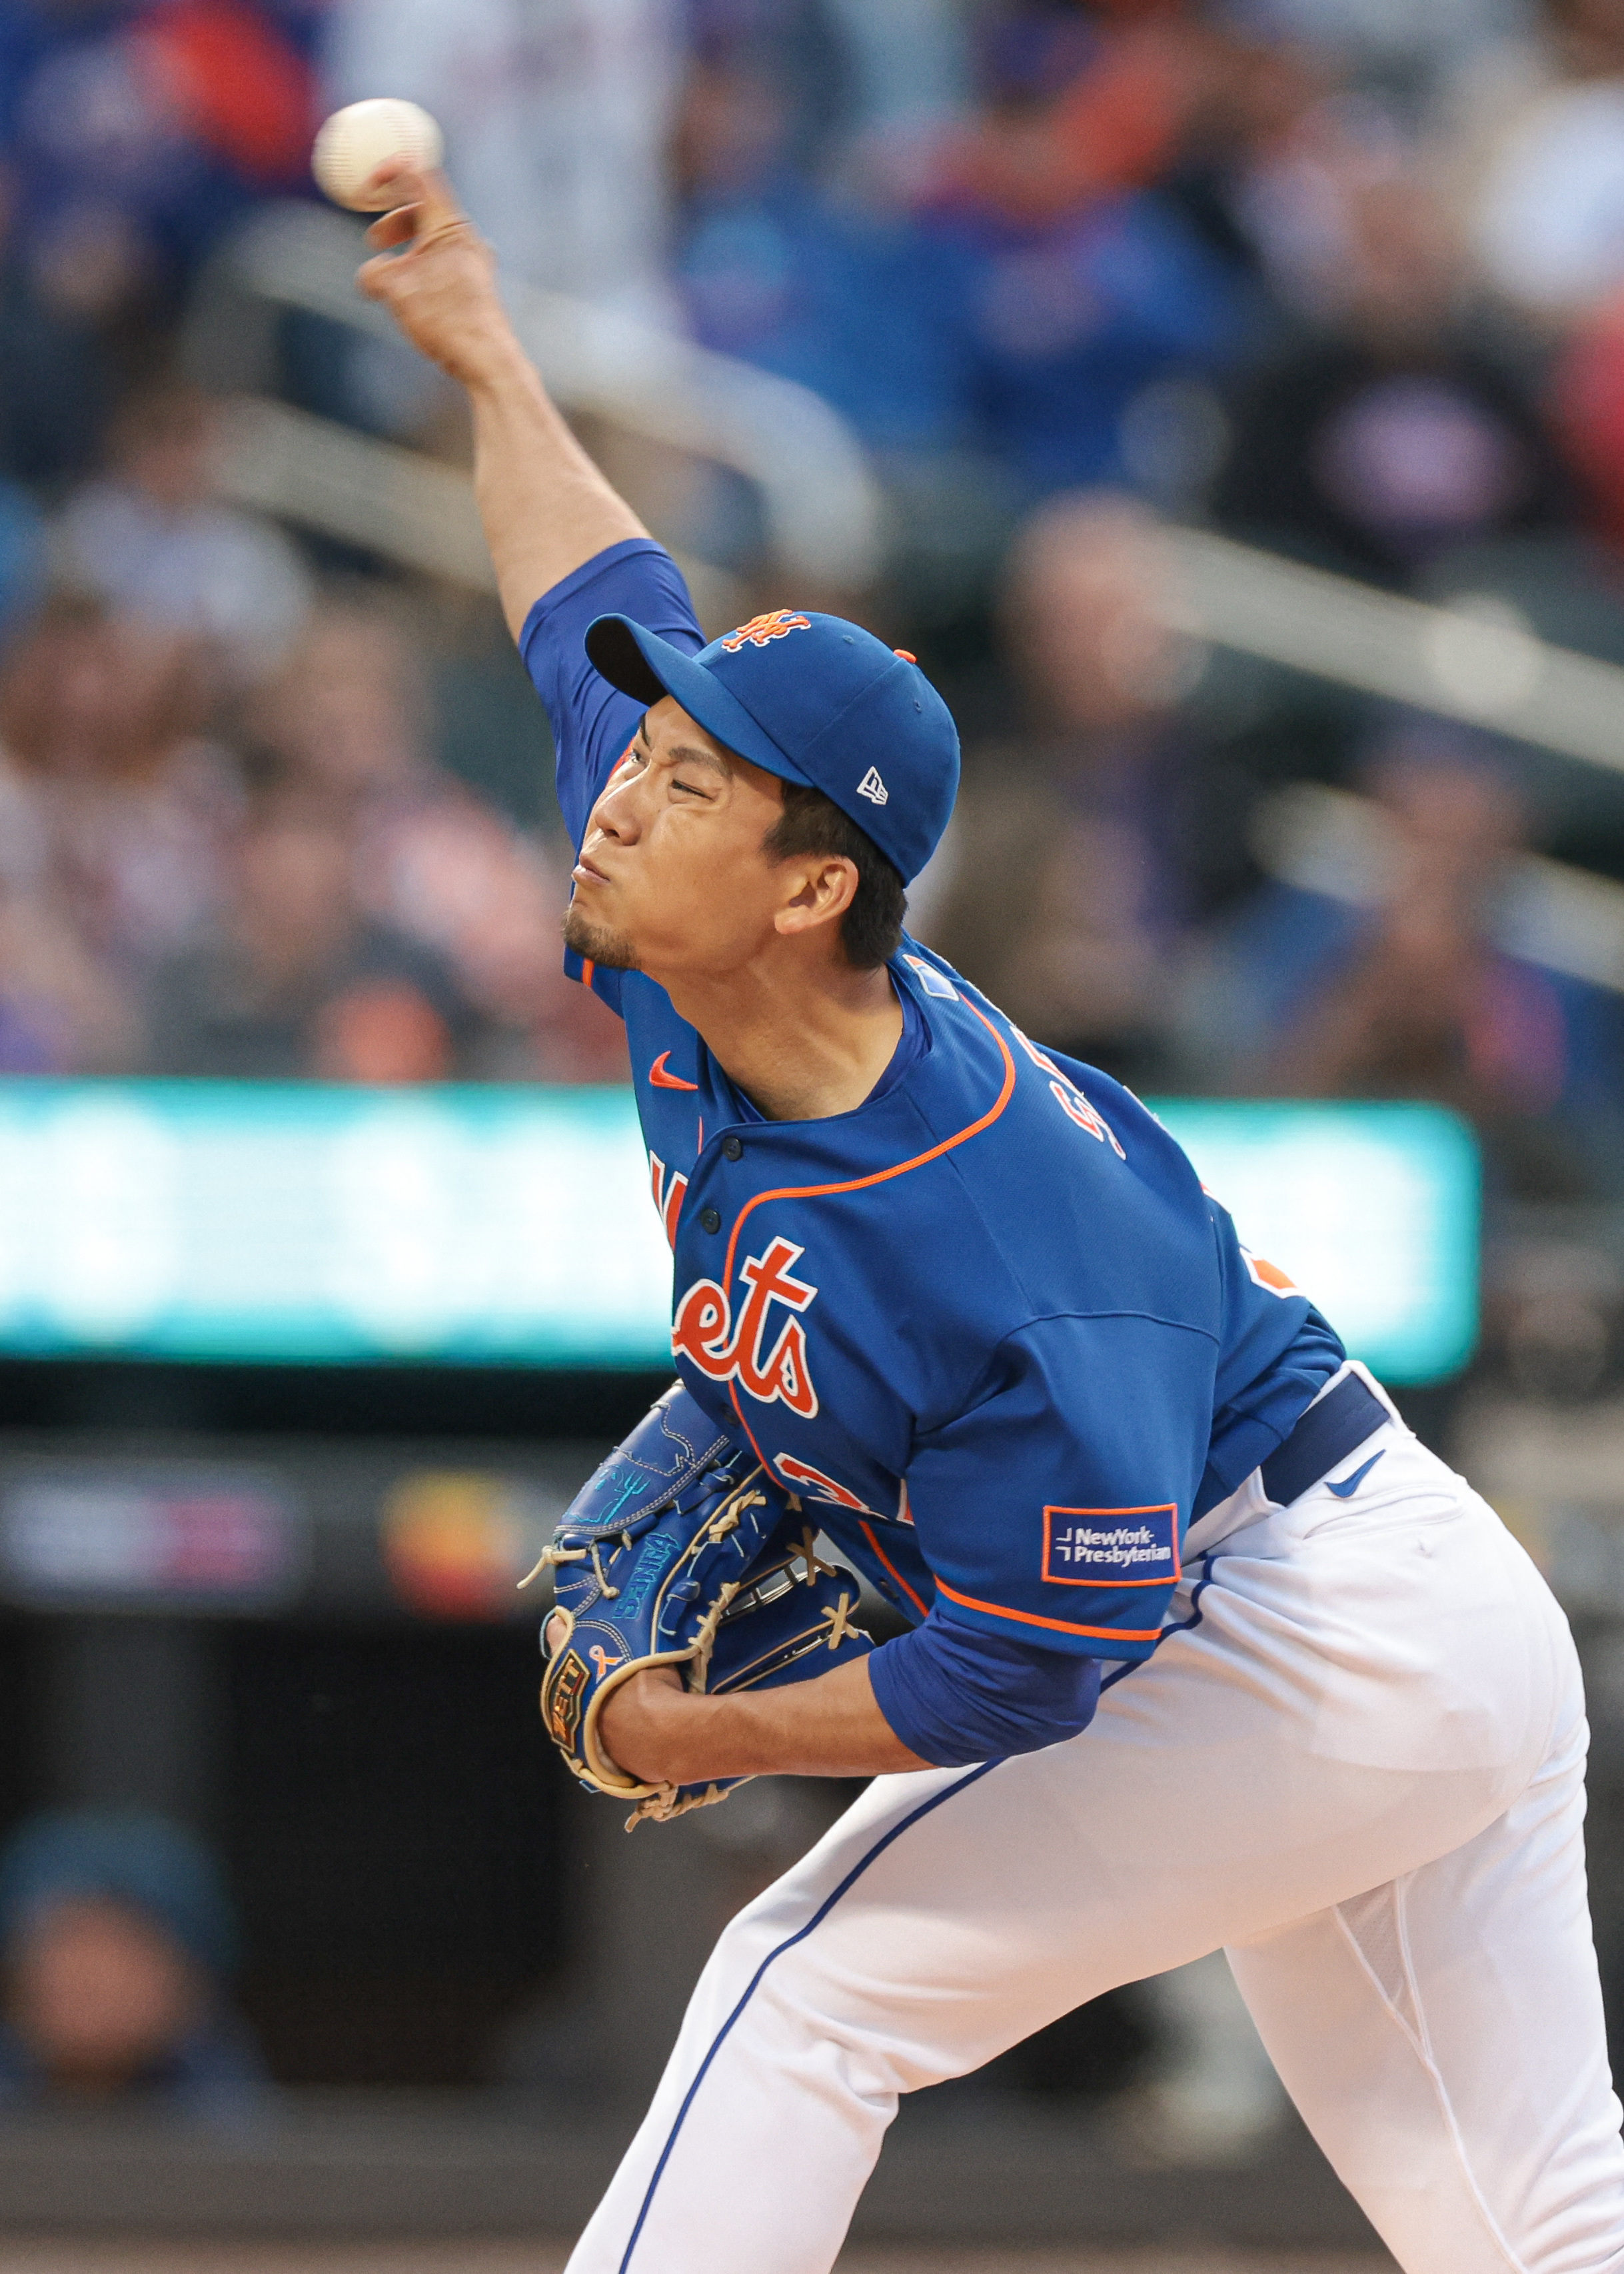 Mets try to ride momentum to elusive series win over Rays